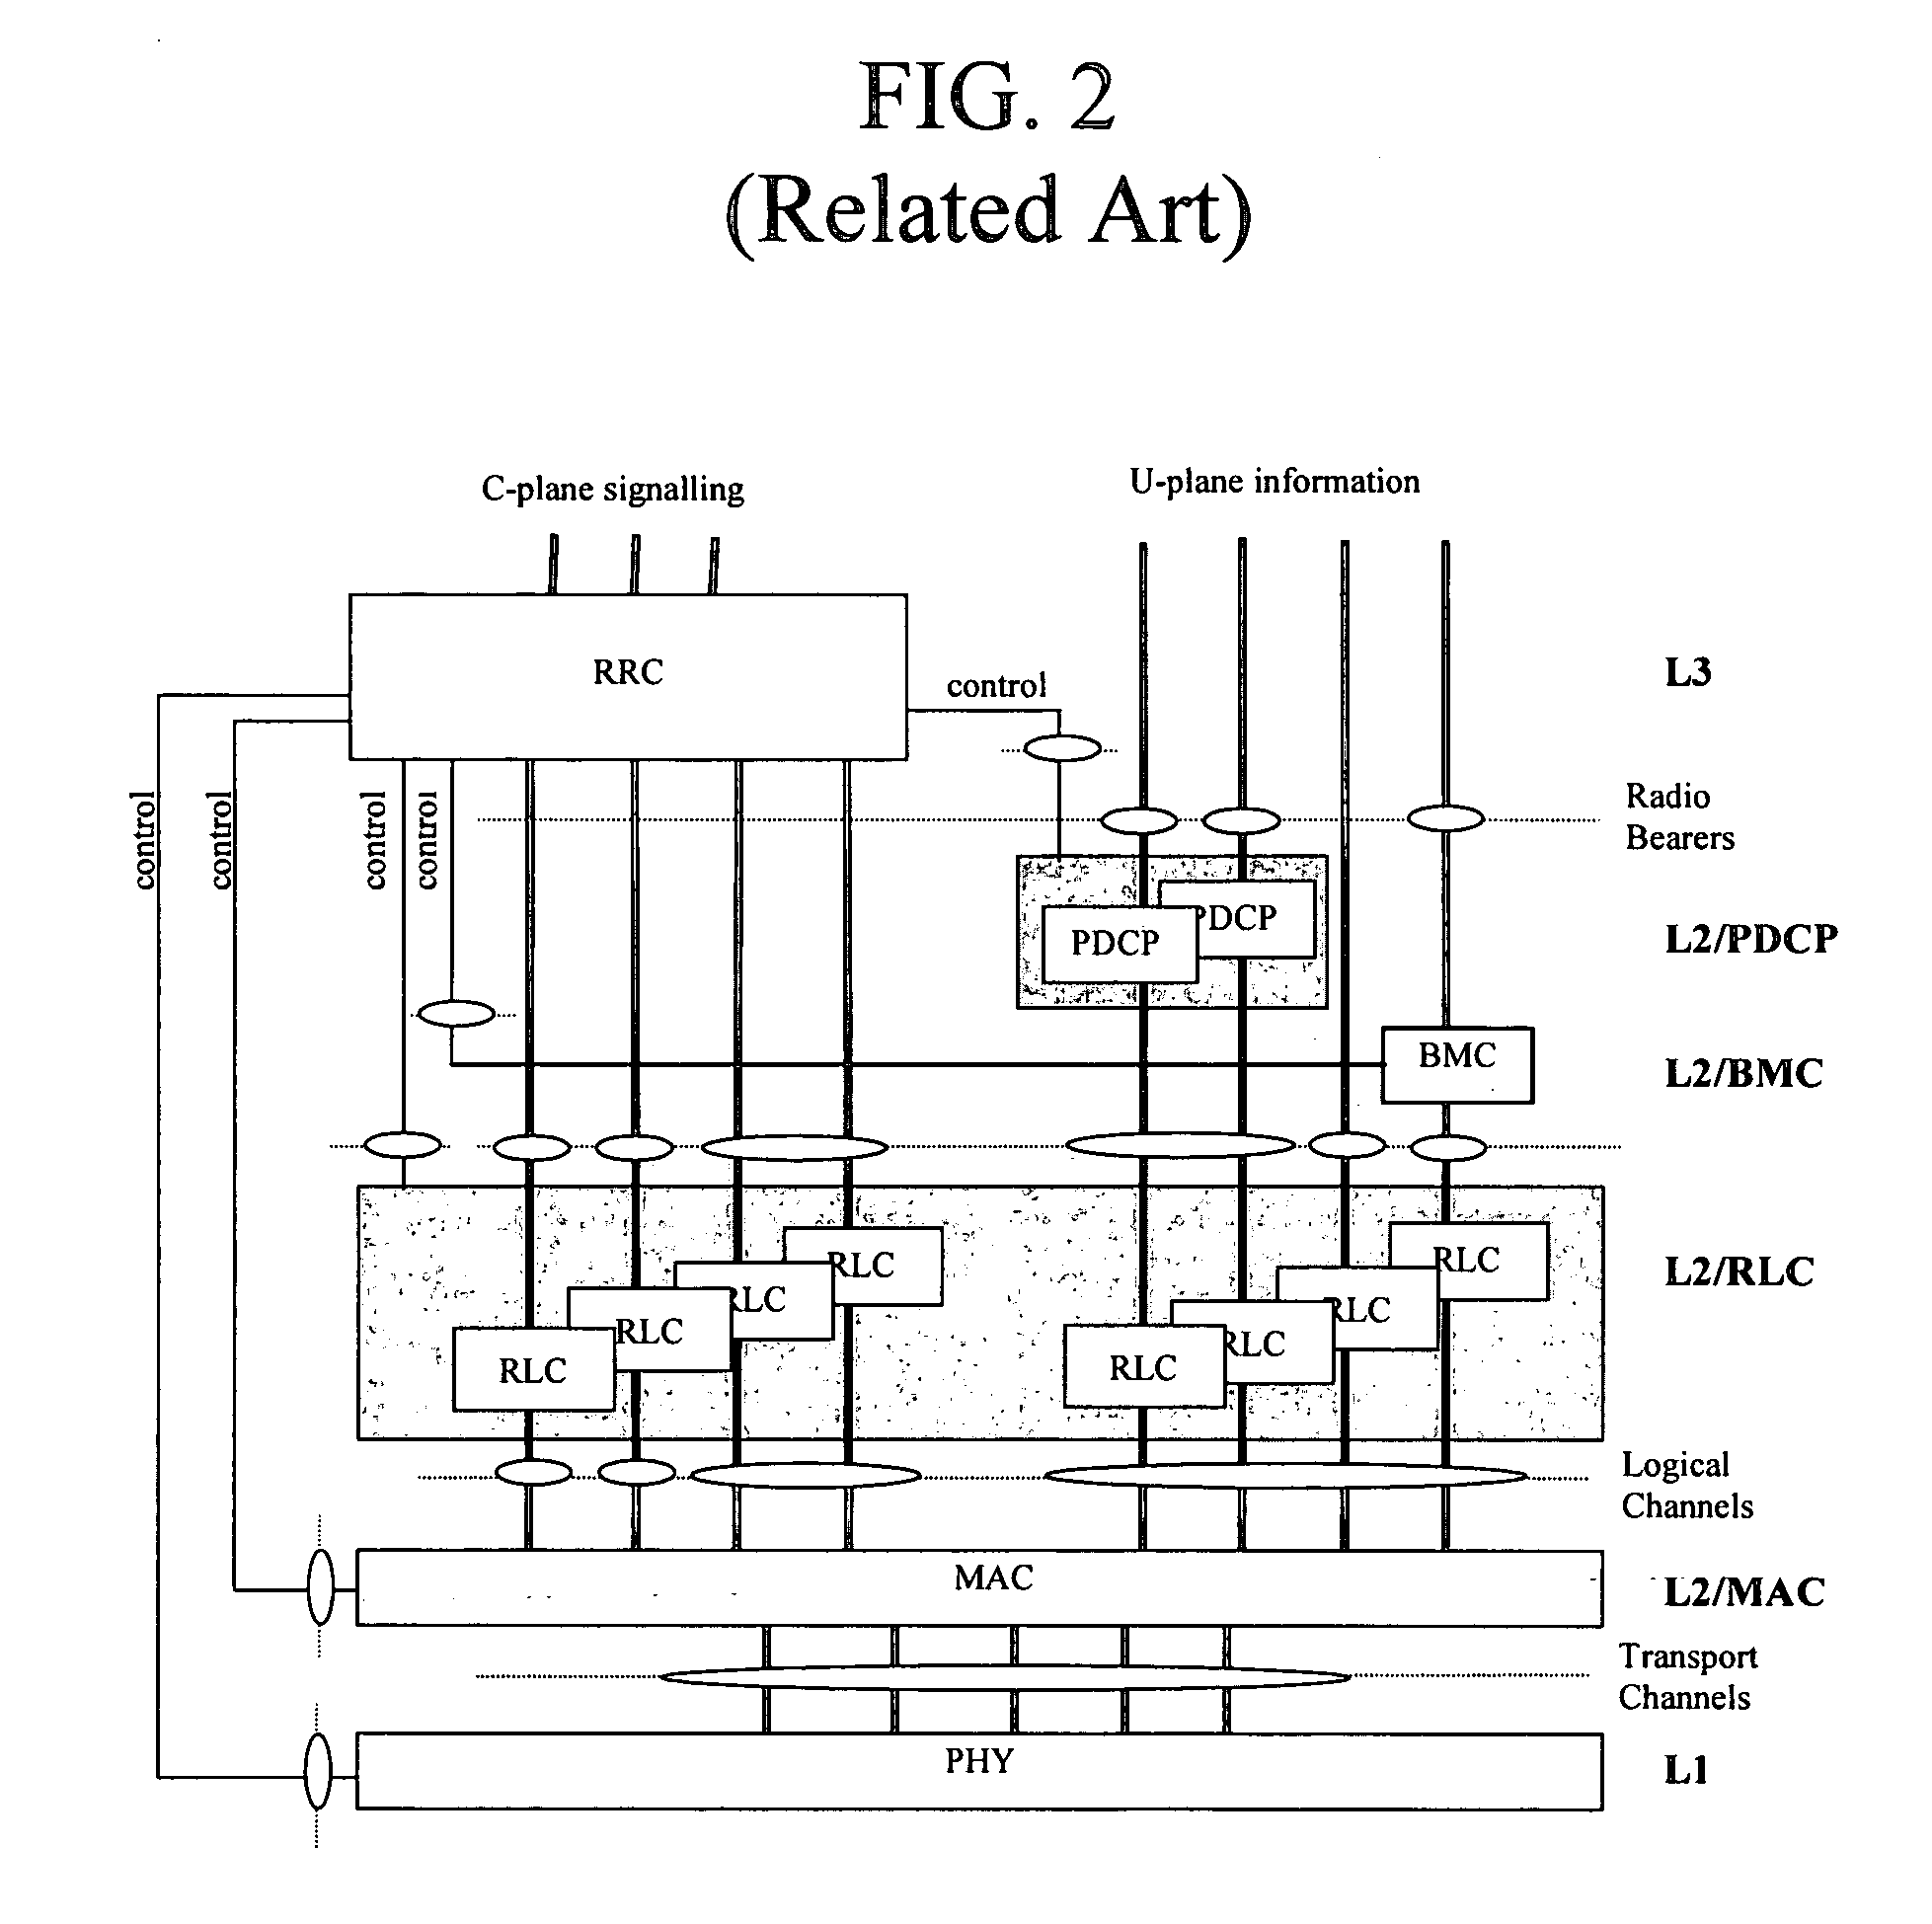 Timing of point-to-multipoint control channel information